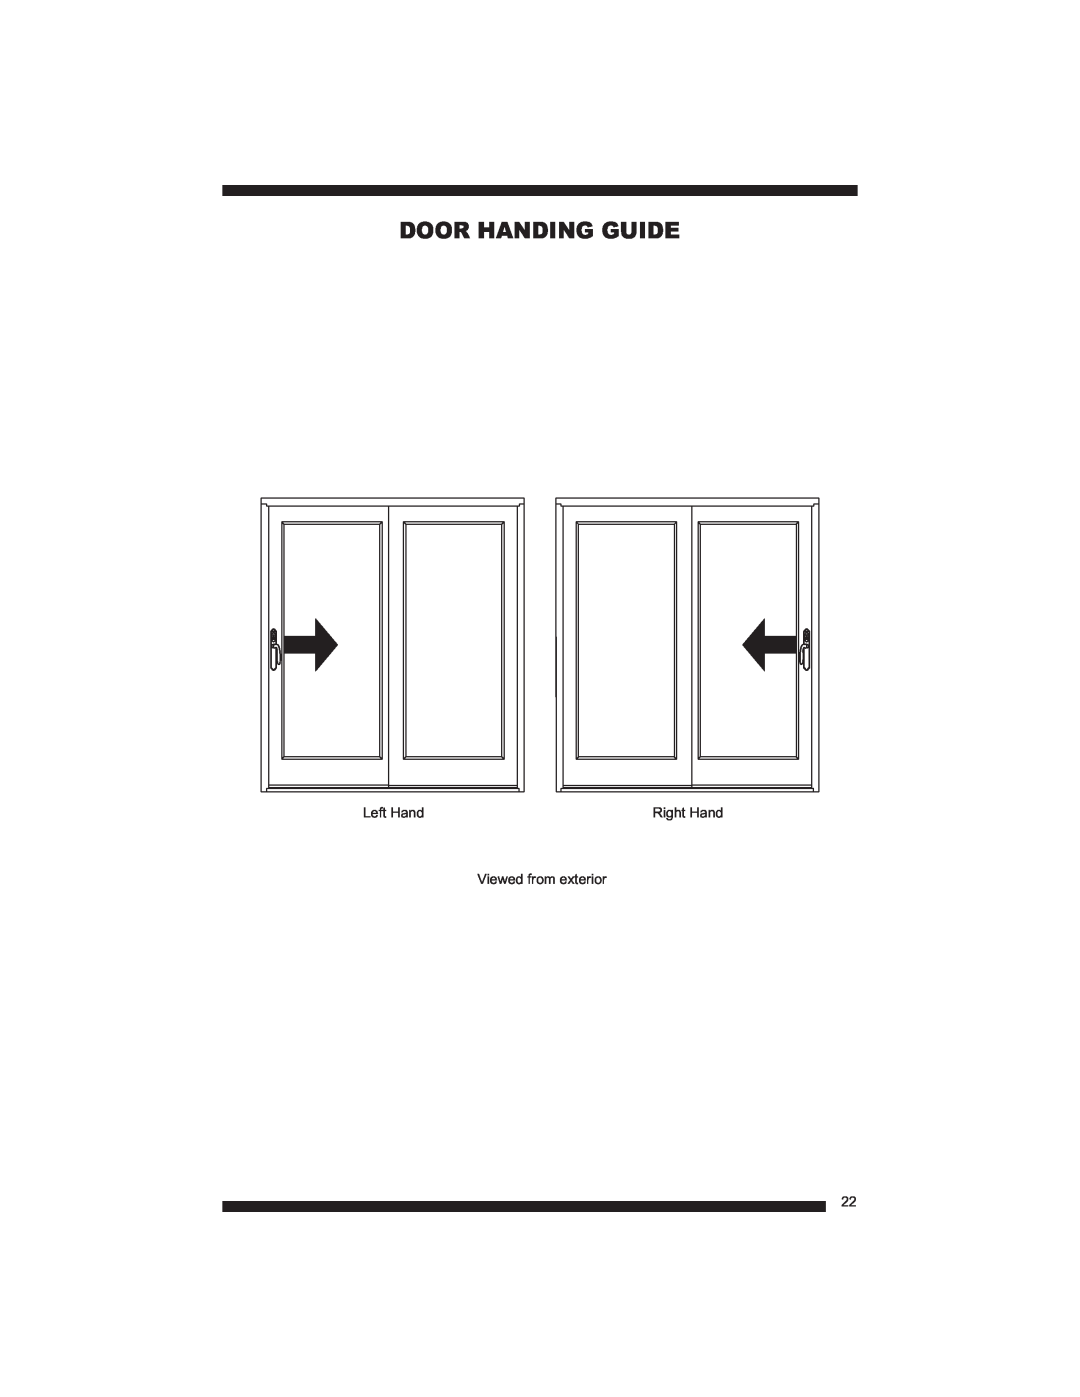 Therma-Tru Fiber-Classic, Smooth-Star manual Door Handing Guide, Left Hand, Right Hand, Viewed from exterior 